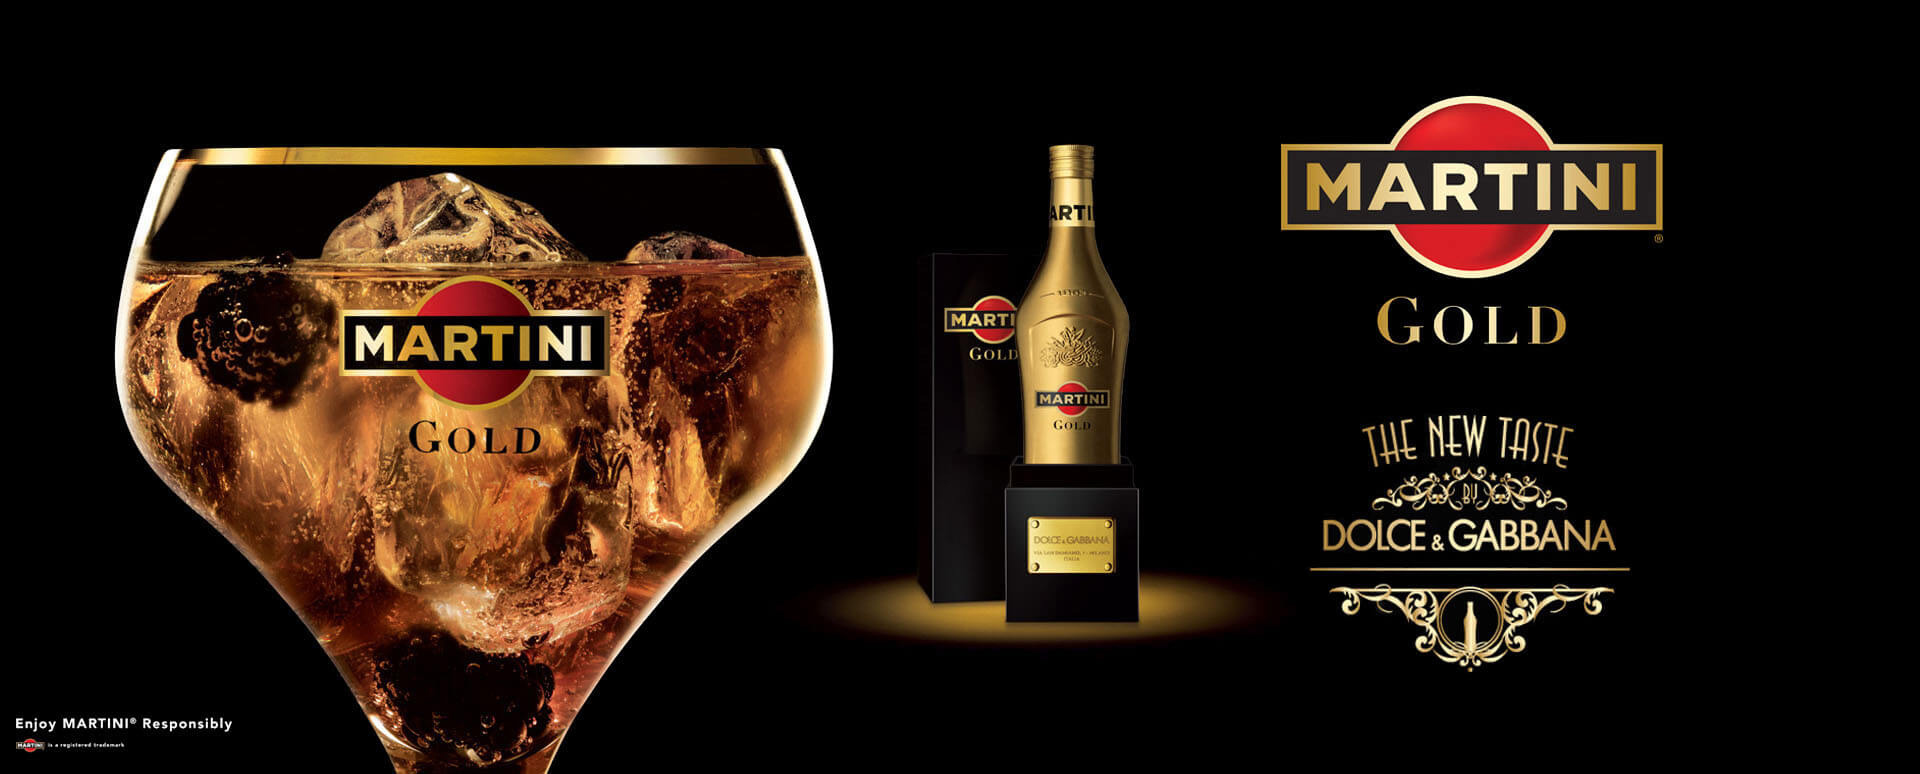 Martini Gold the new taste Dolce & Gabbana brand identity, packaging and drinks promotion for Bacardi Global Travel Retail